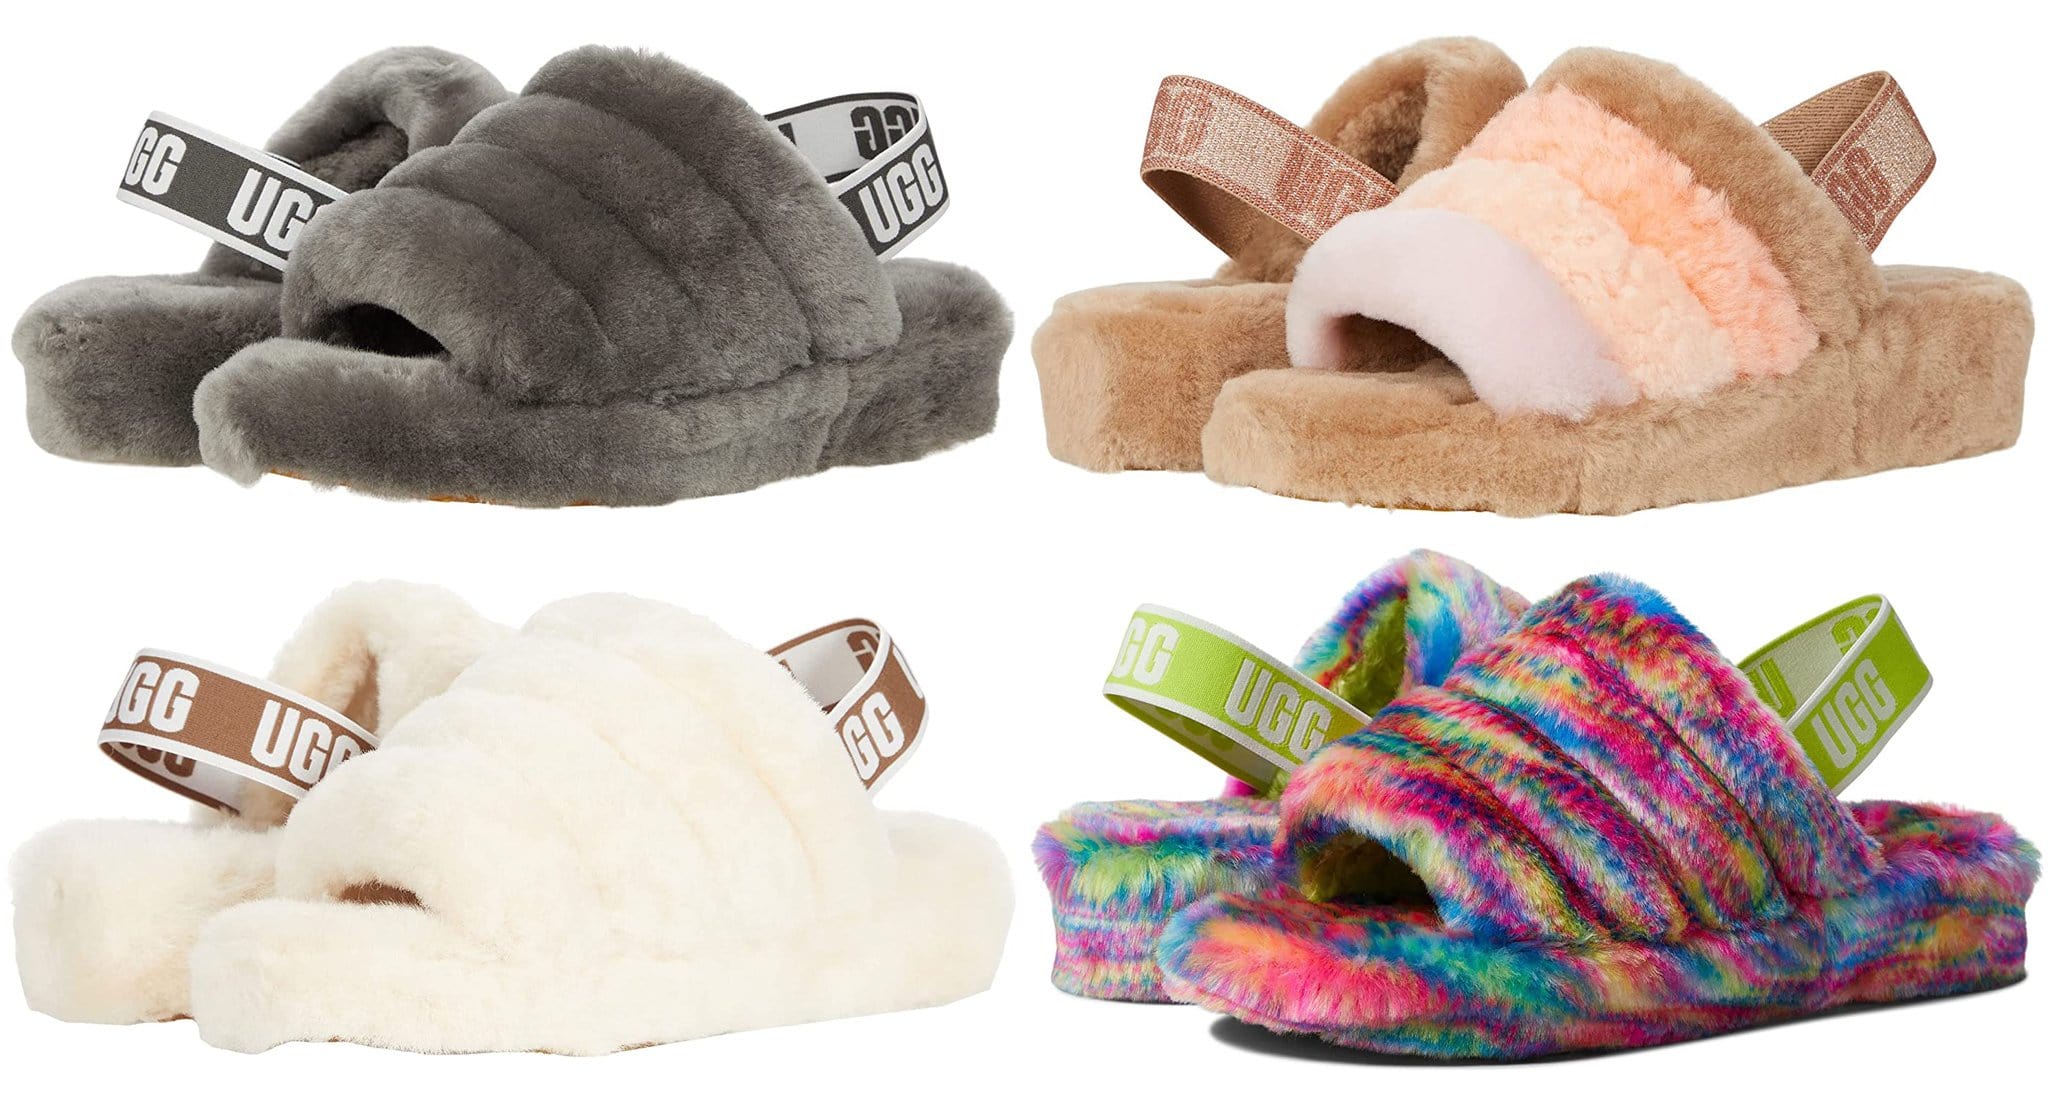 A lightweight slipper and sandal in one, the Fluff Yeah is made of shearling and comes in a variety of prints and colors